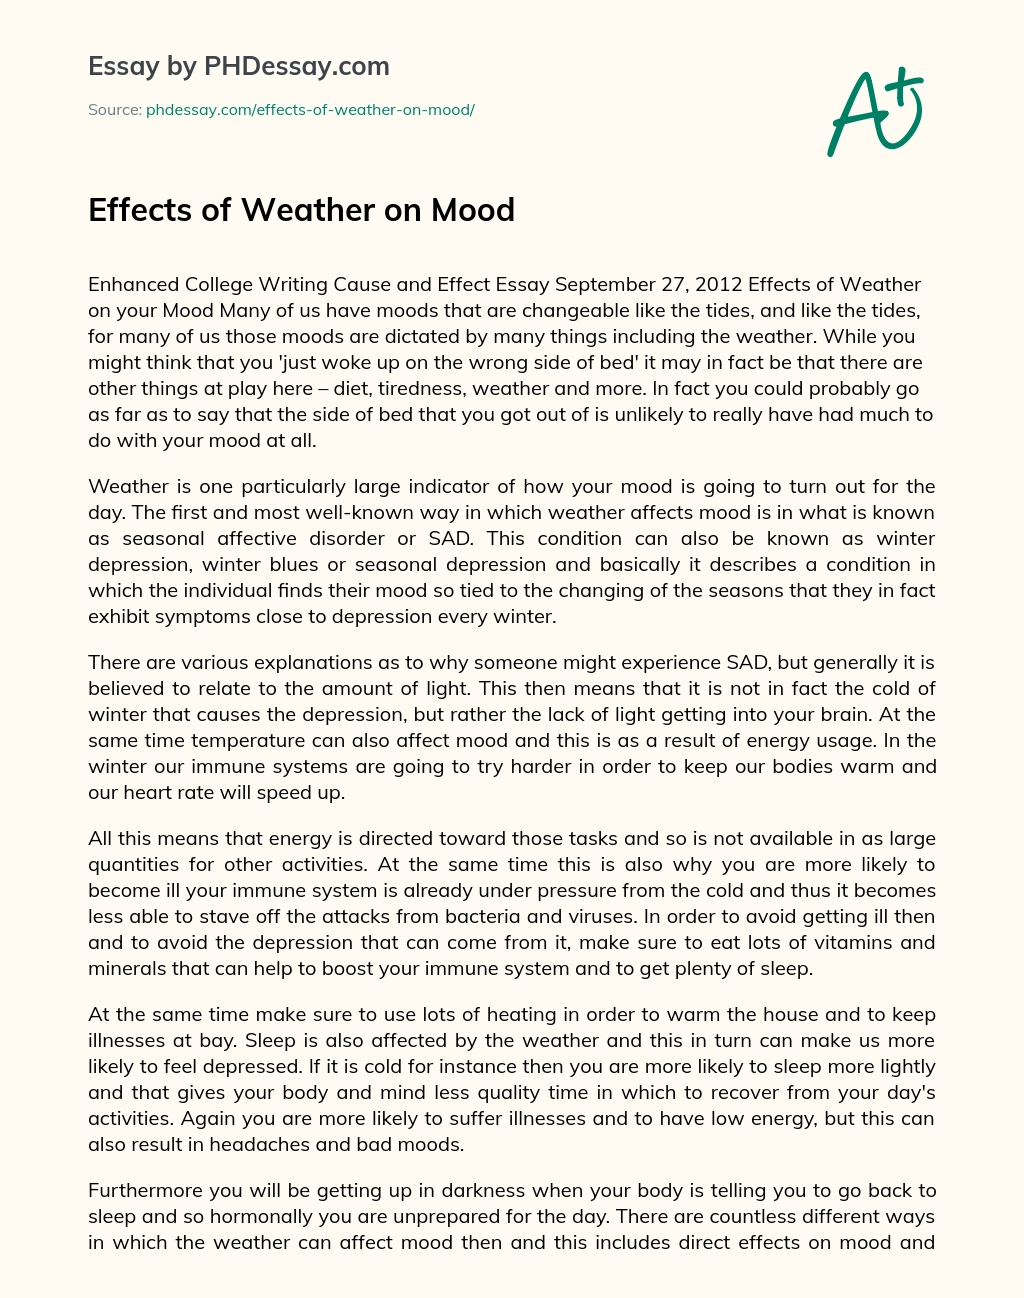 Effects of Weather on Mood essay